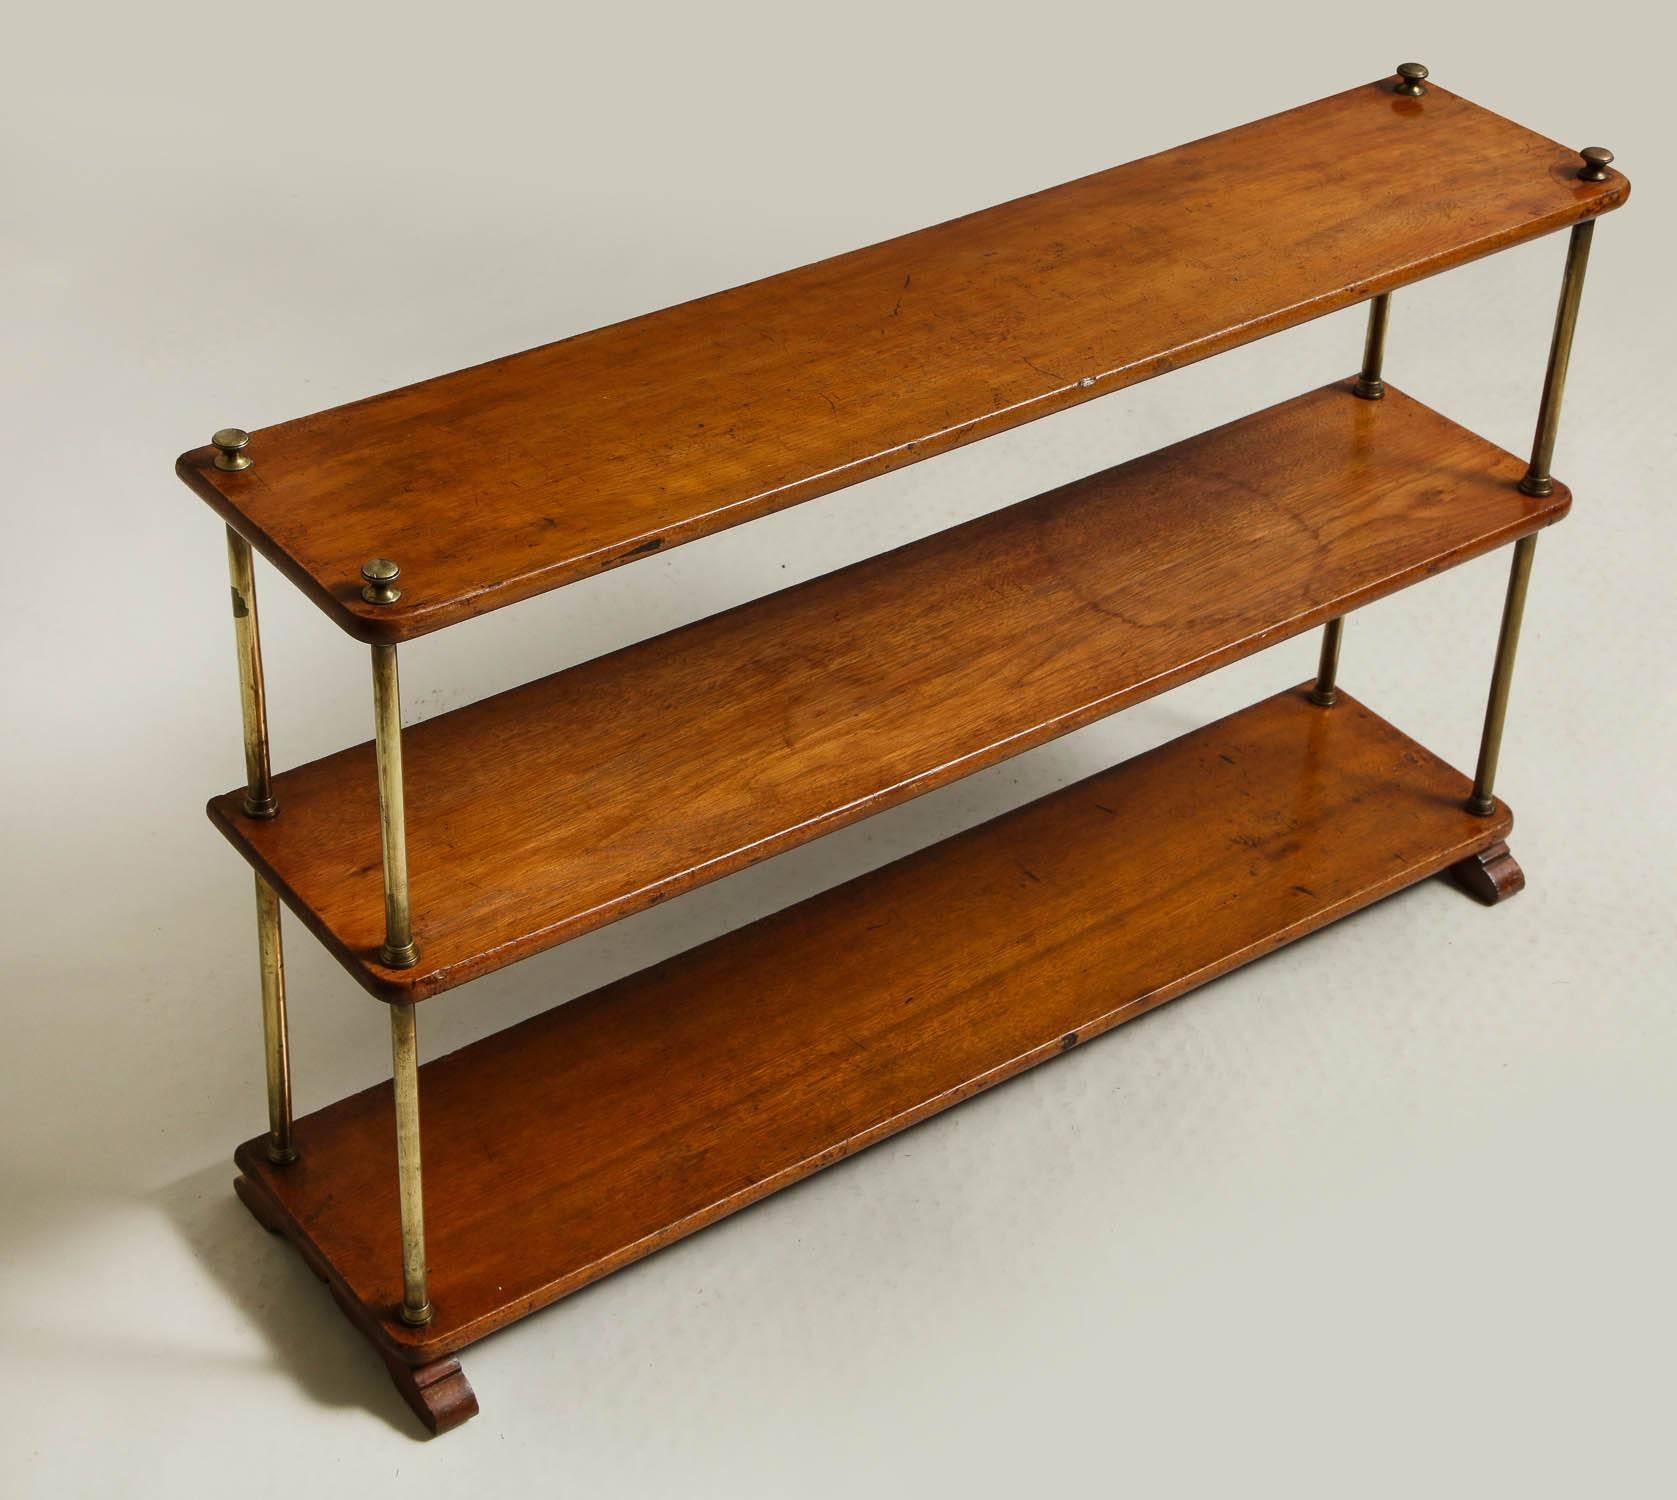 Mahogany and Brass Traveling Campaign Shelf 1